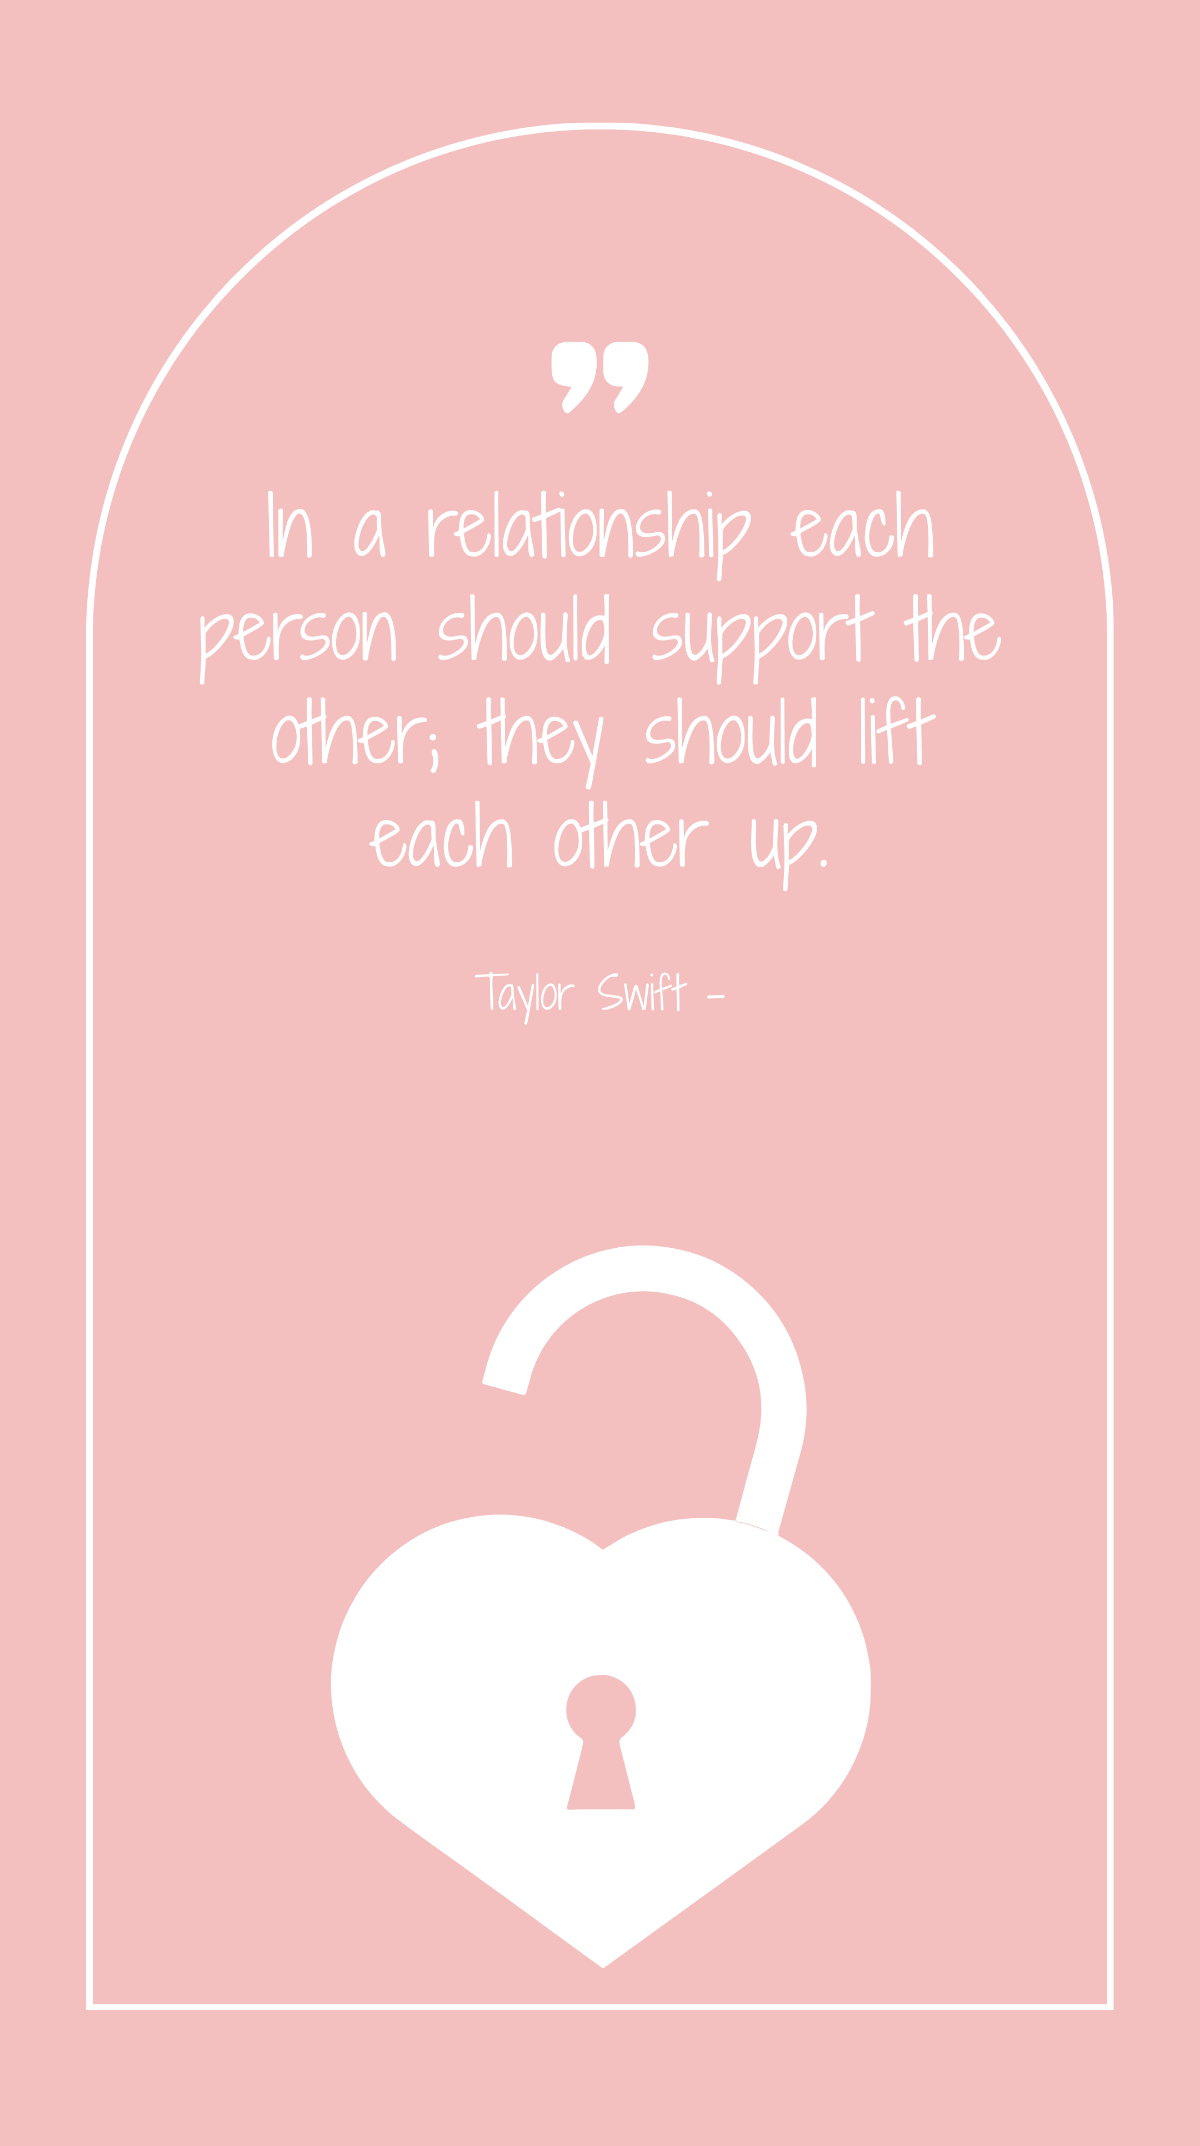 Taylor Swift - In a relationship each person should support the other; they should lift each other up. Template